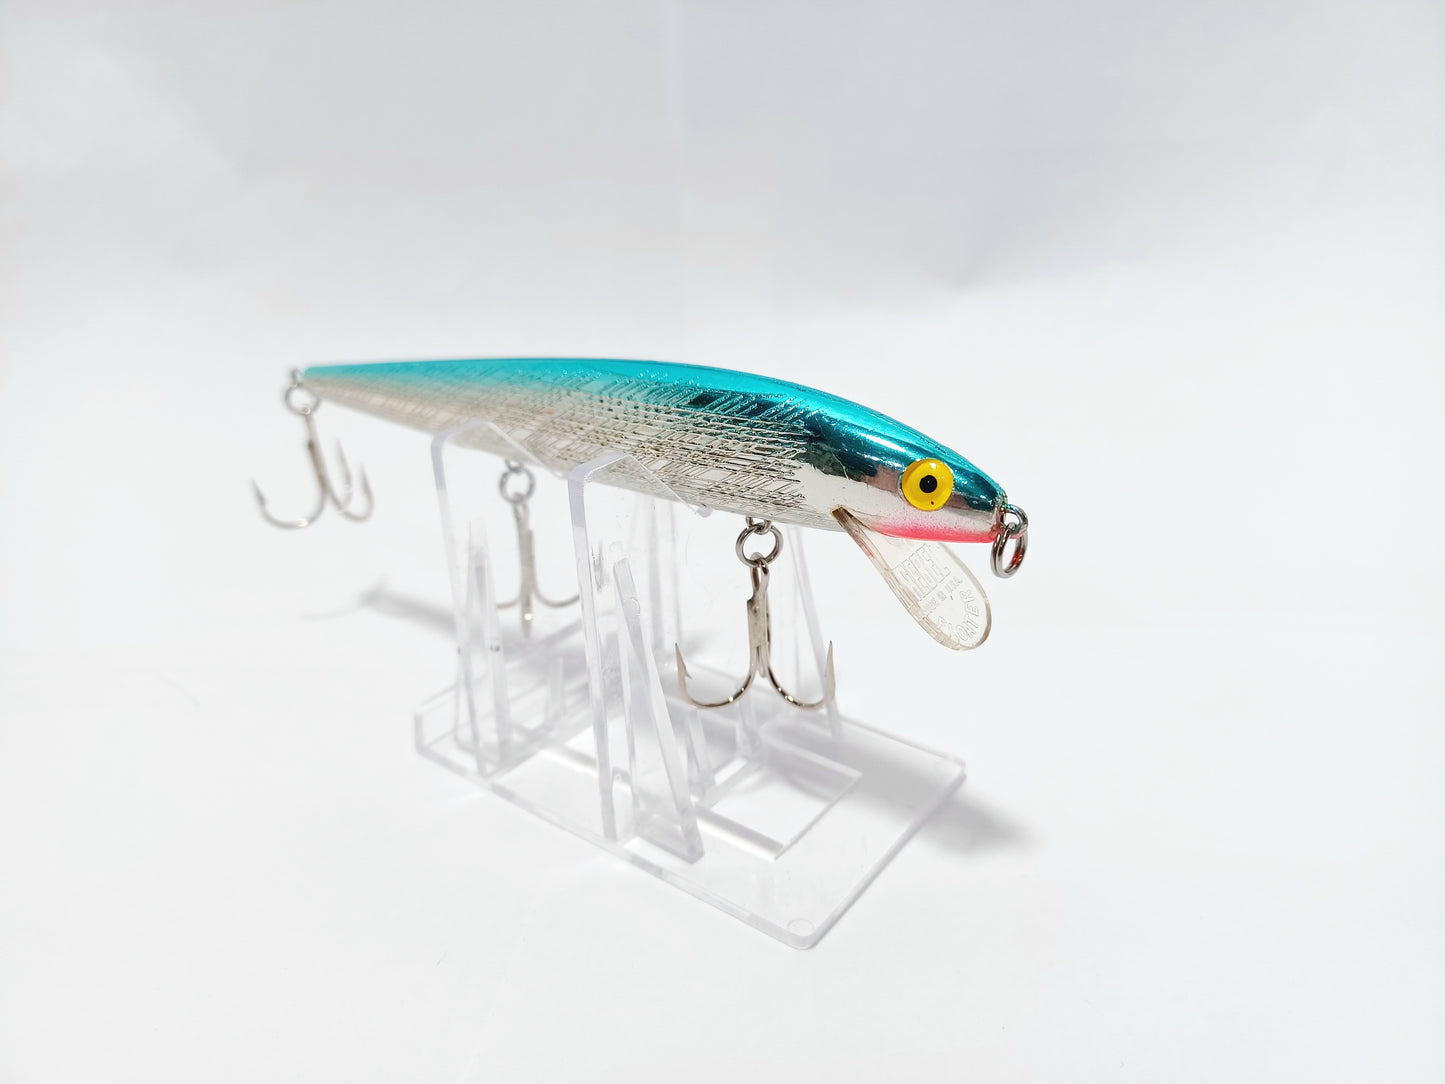 Vintage Rebel minnow floating lure 4.5" F2003s Blue Silver